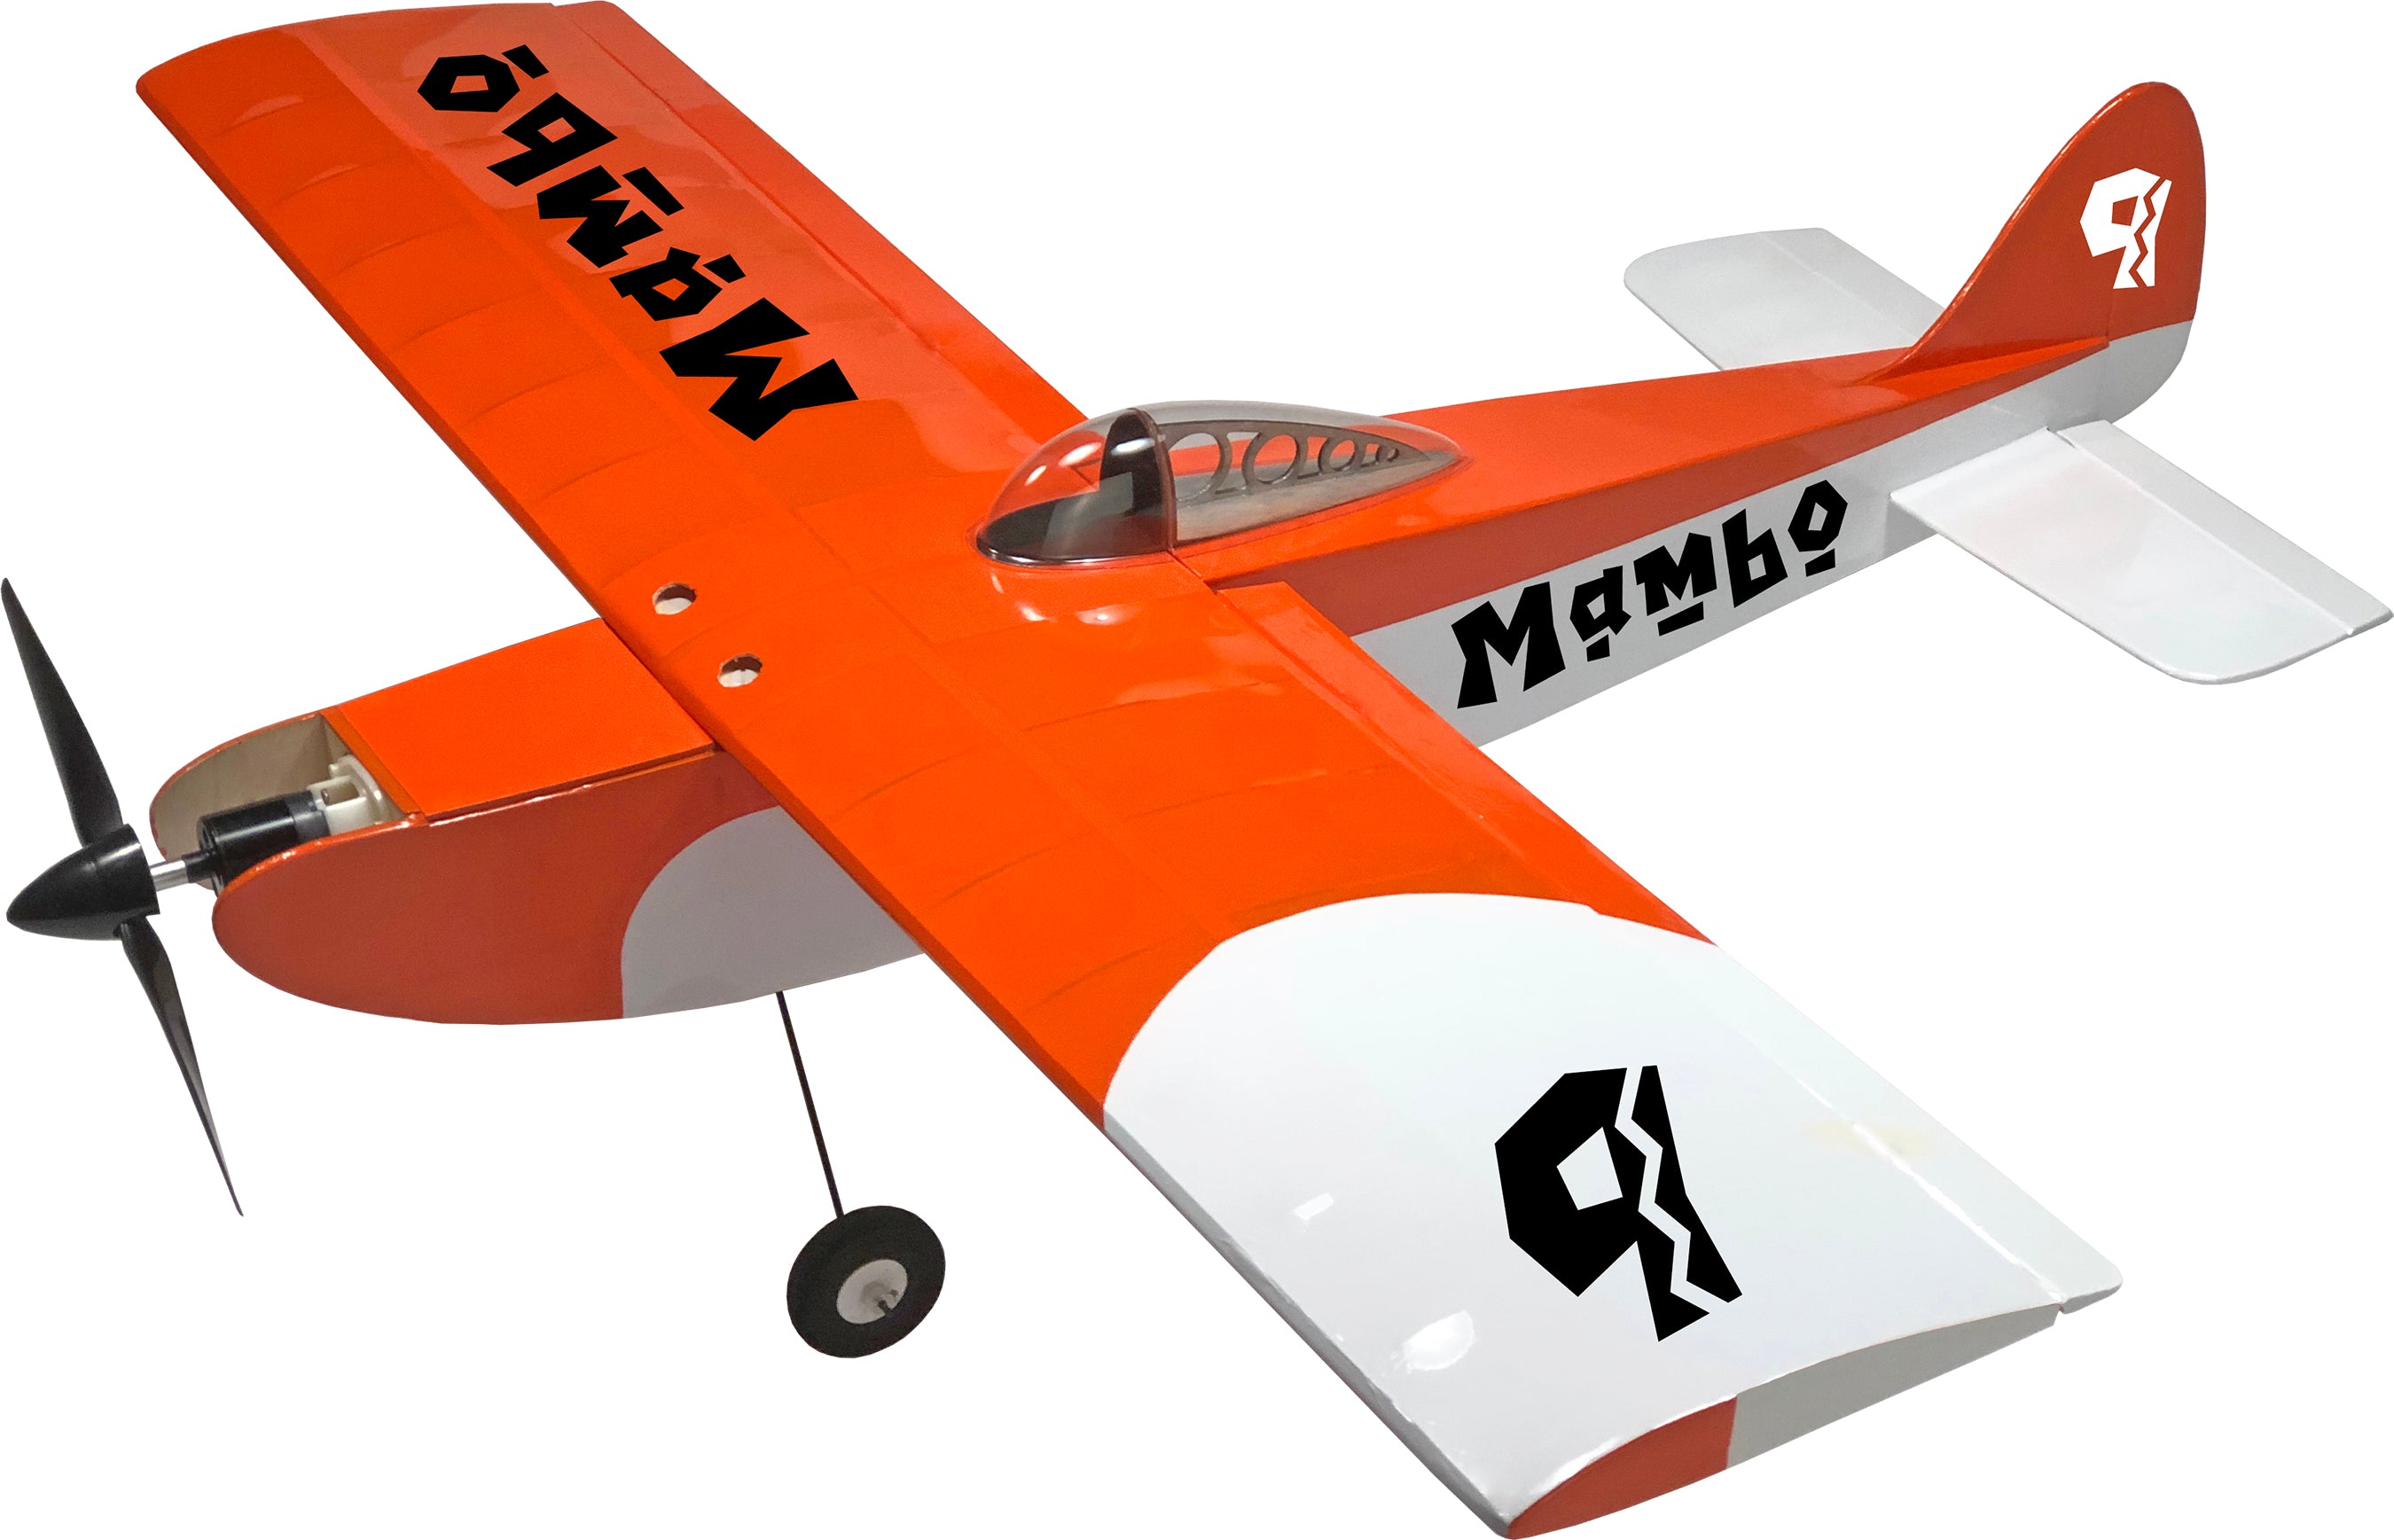 Mambo RC Airplane Kit from Old School Model Works | DU-BRO RC